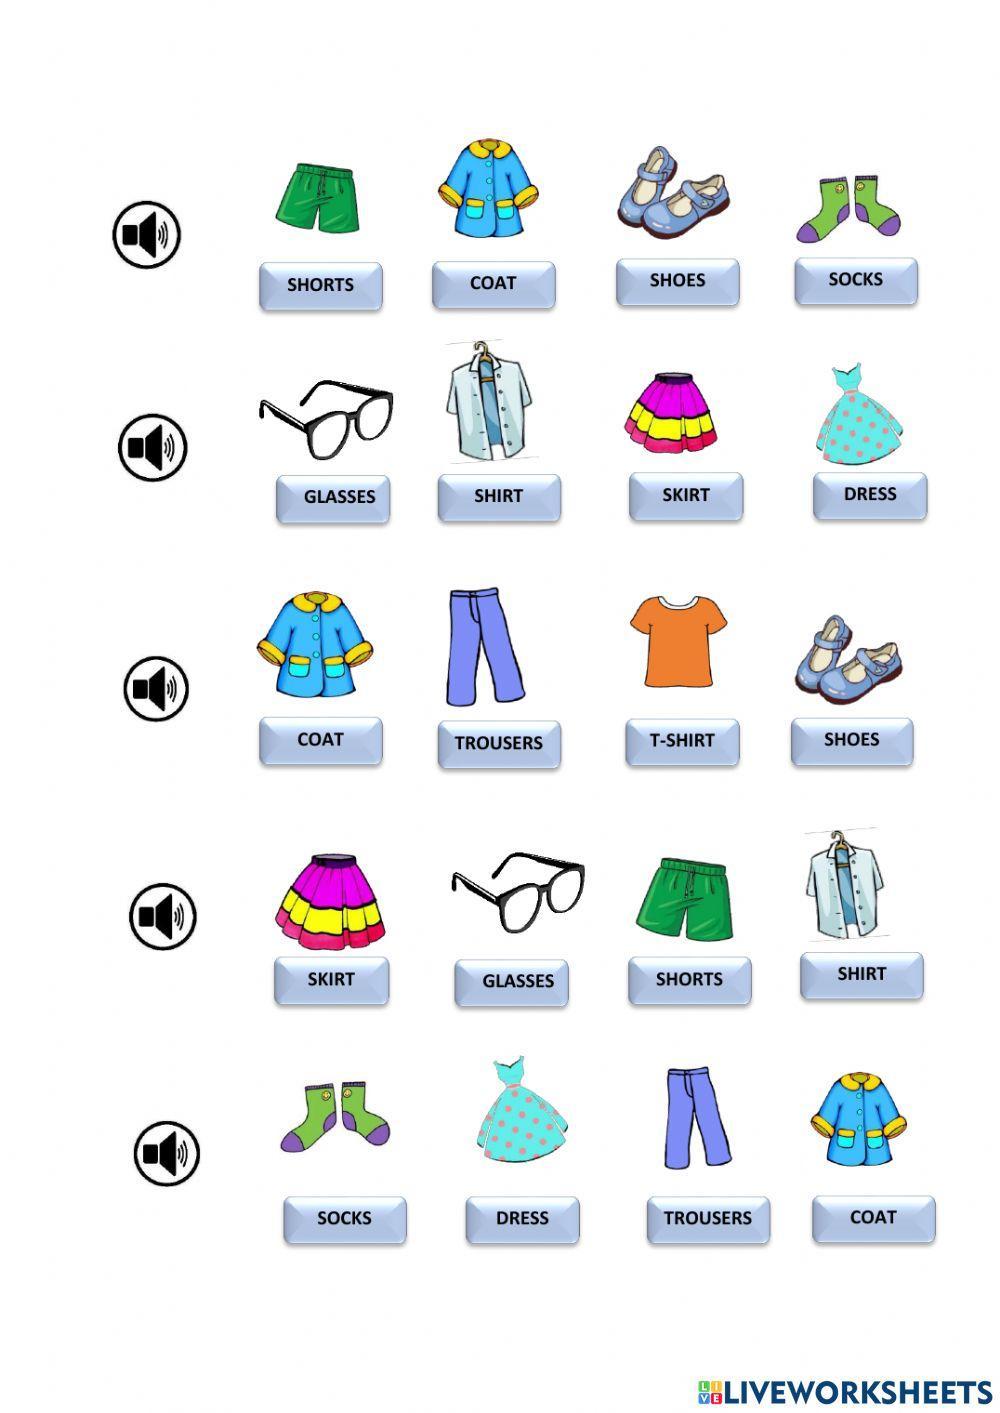 Clothes for kids